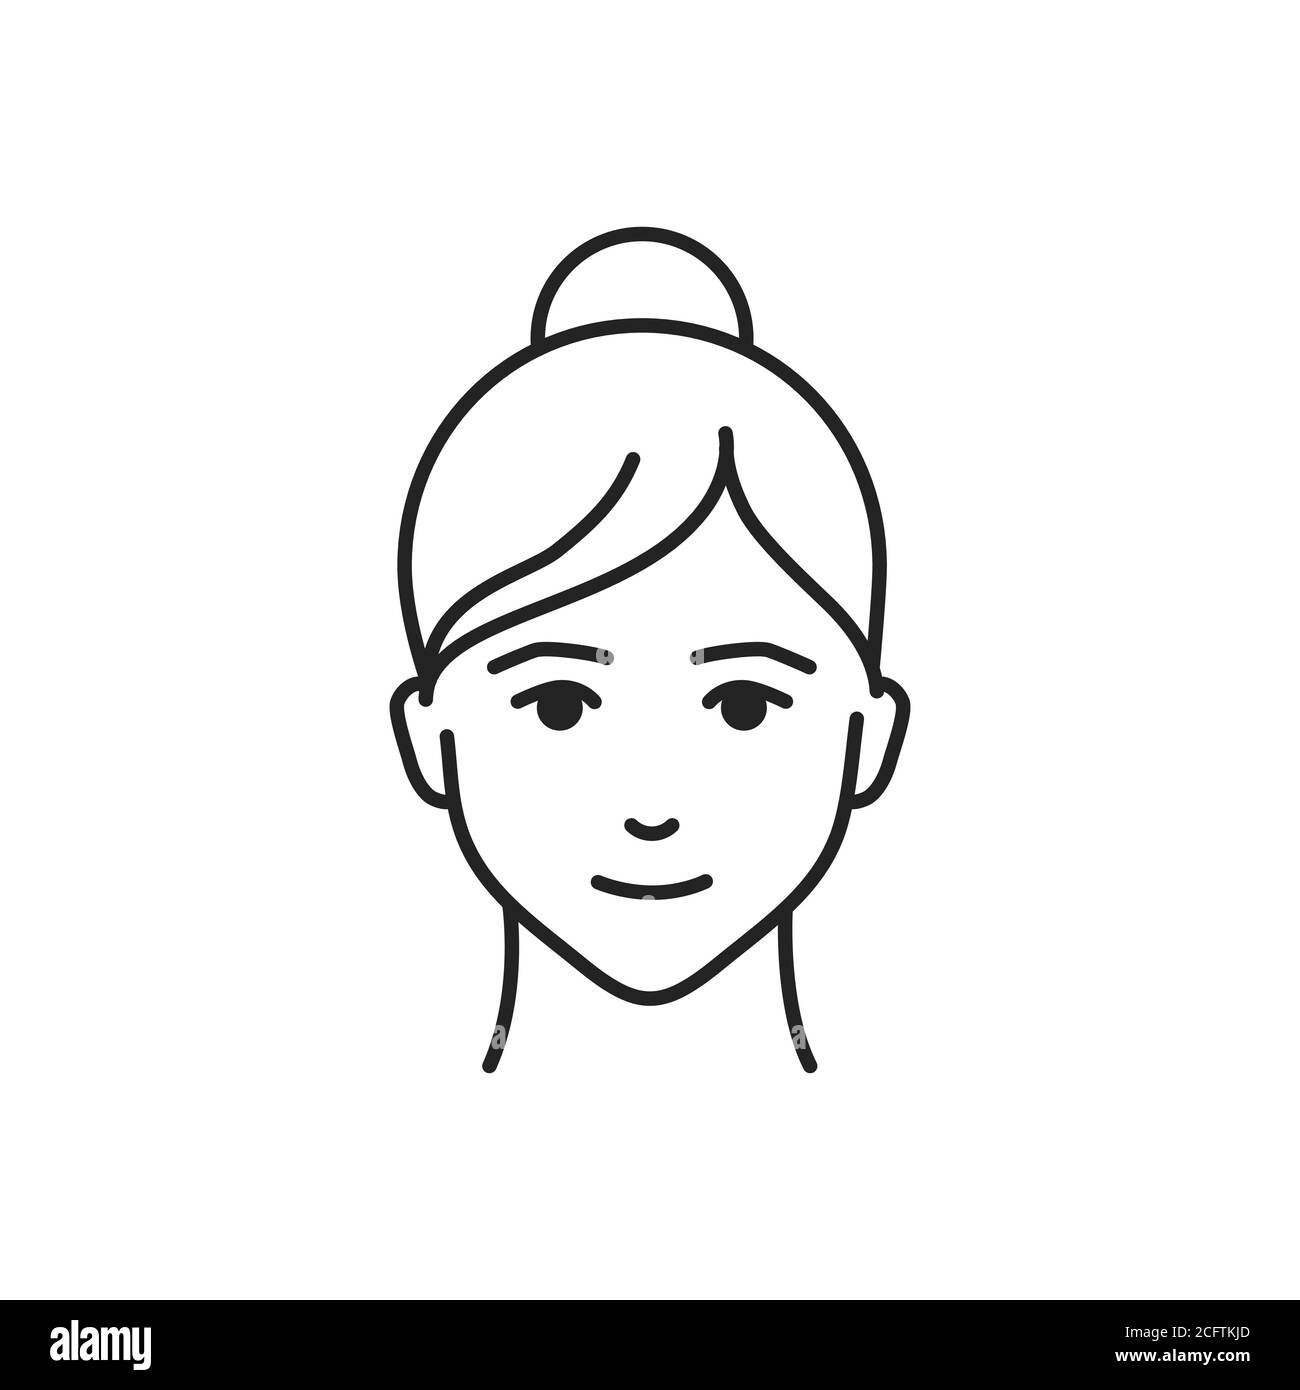 Human feeling satisfaction line black icon. Face of a young girl depicting emotion sketch element. Cute character on white background Stock Vector